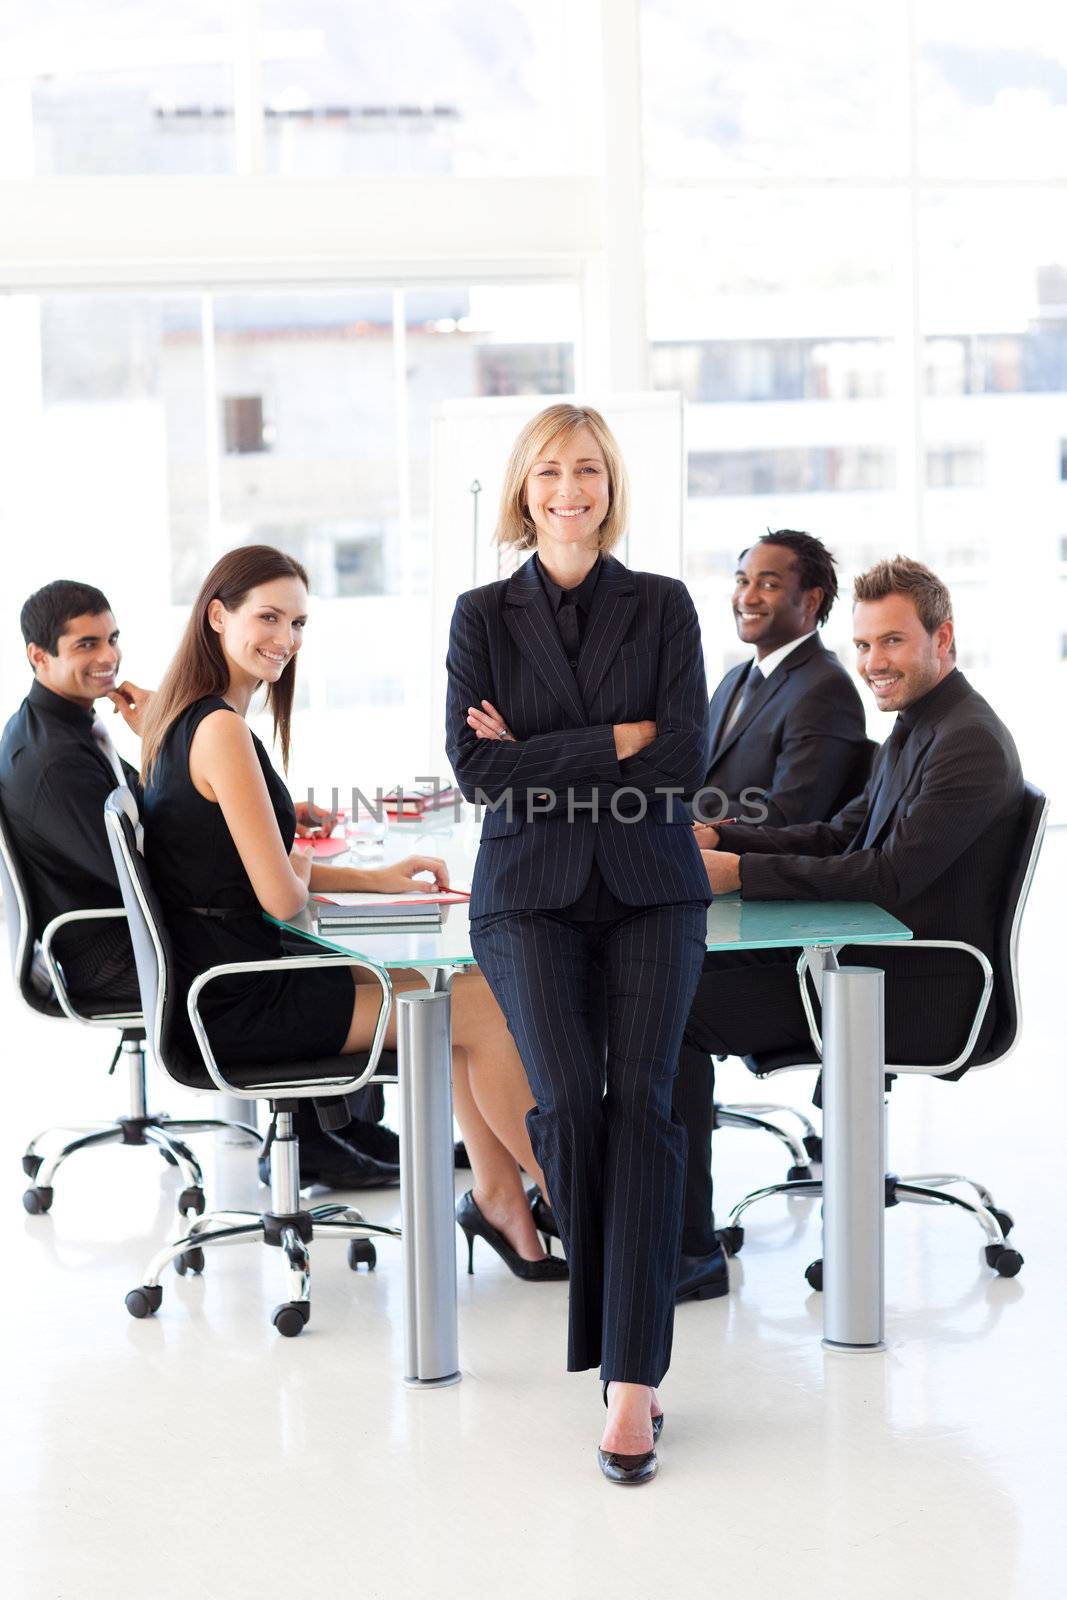 Multi-ethnic business team smiling at the camera in a meeting